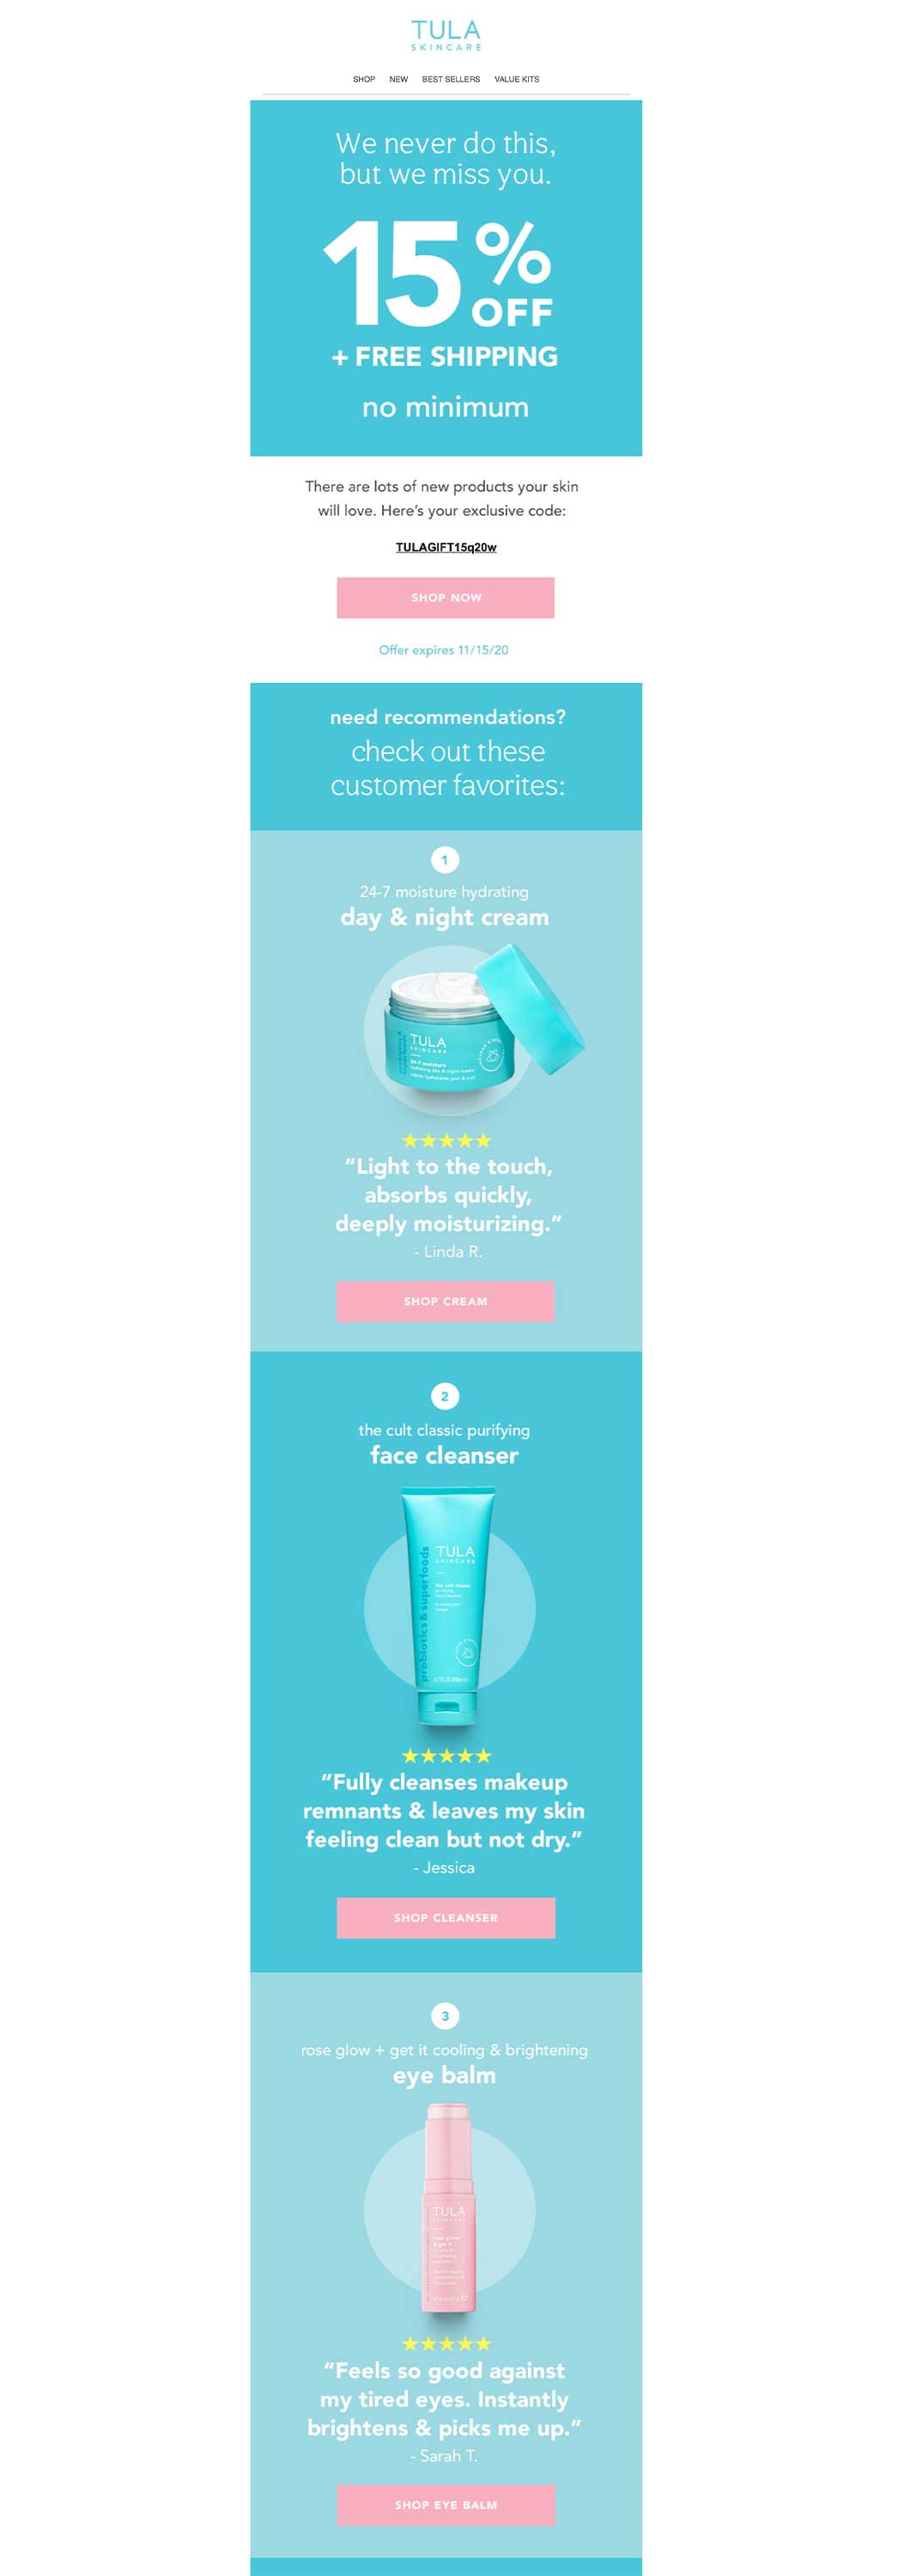 Skincare brand Tula offers a 15% discount as part of its win-back campaign, but takes the email a step further by also offering product recommendations.